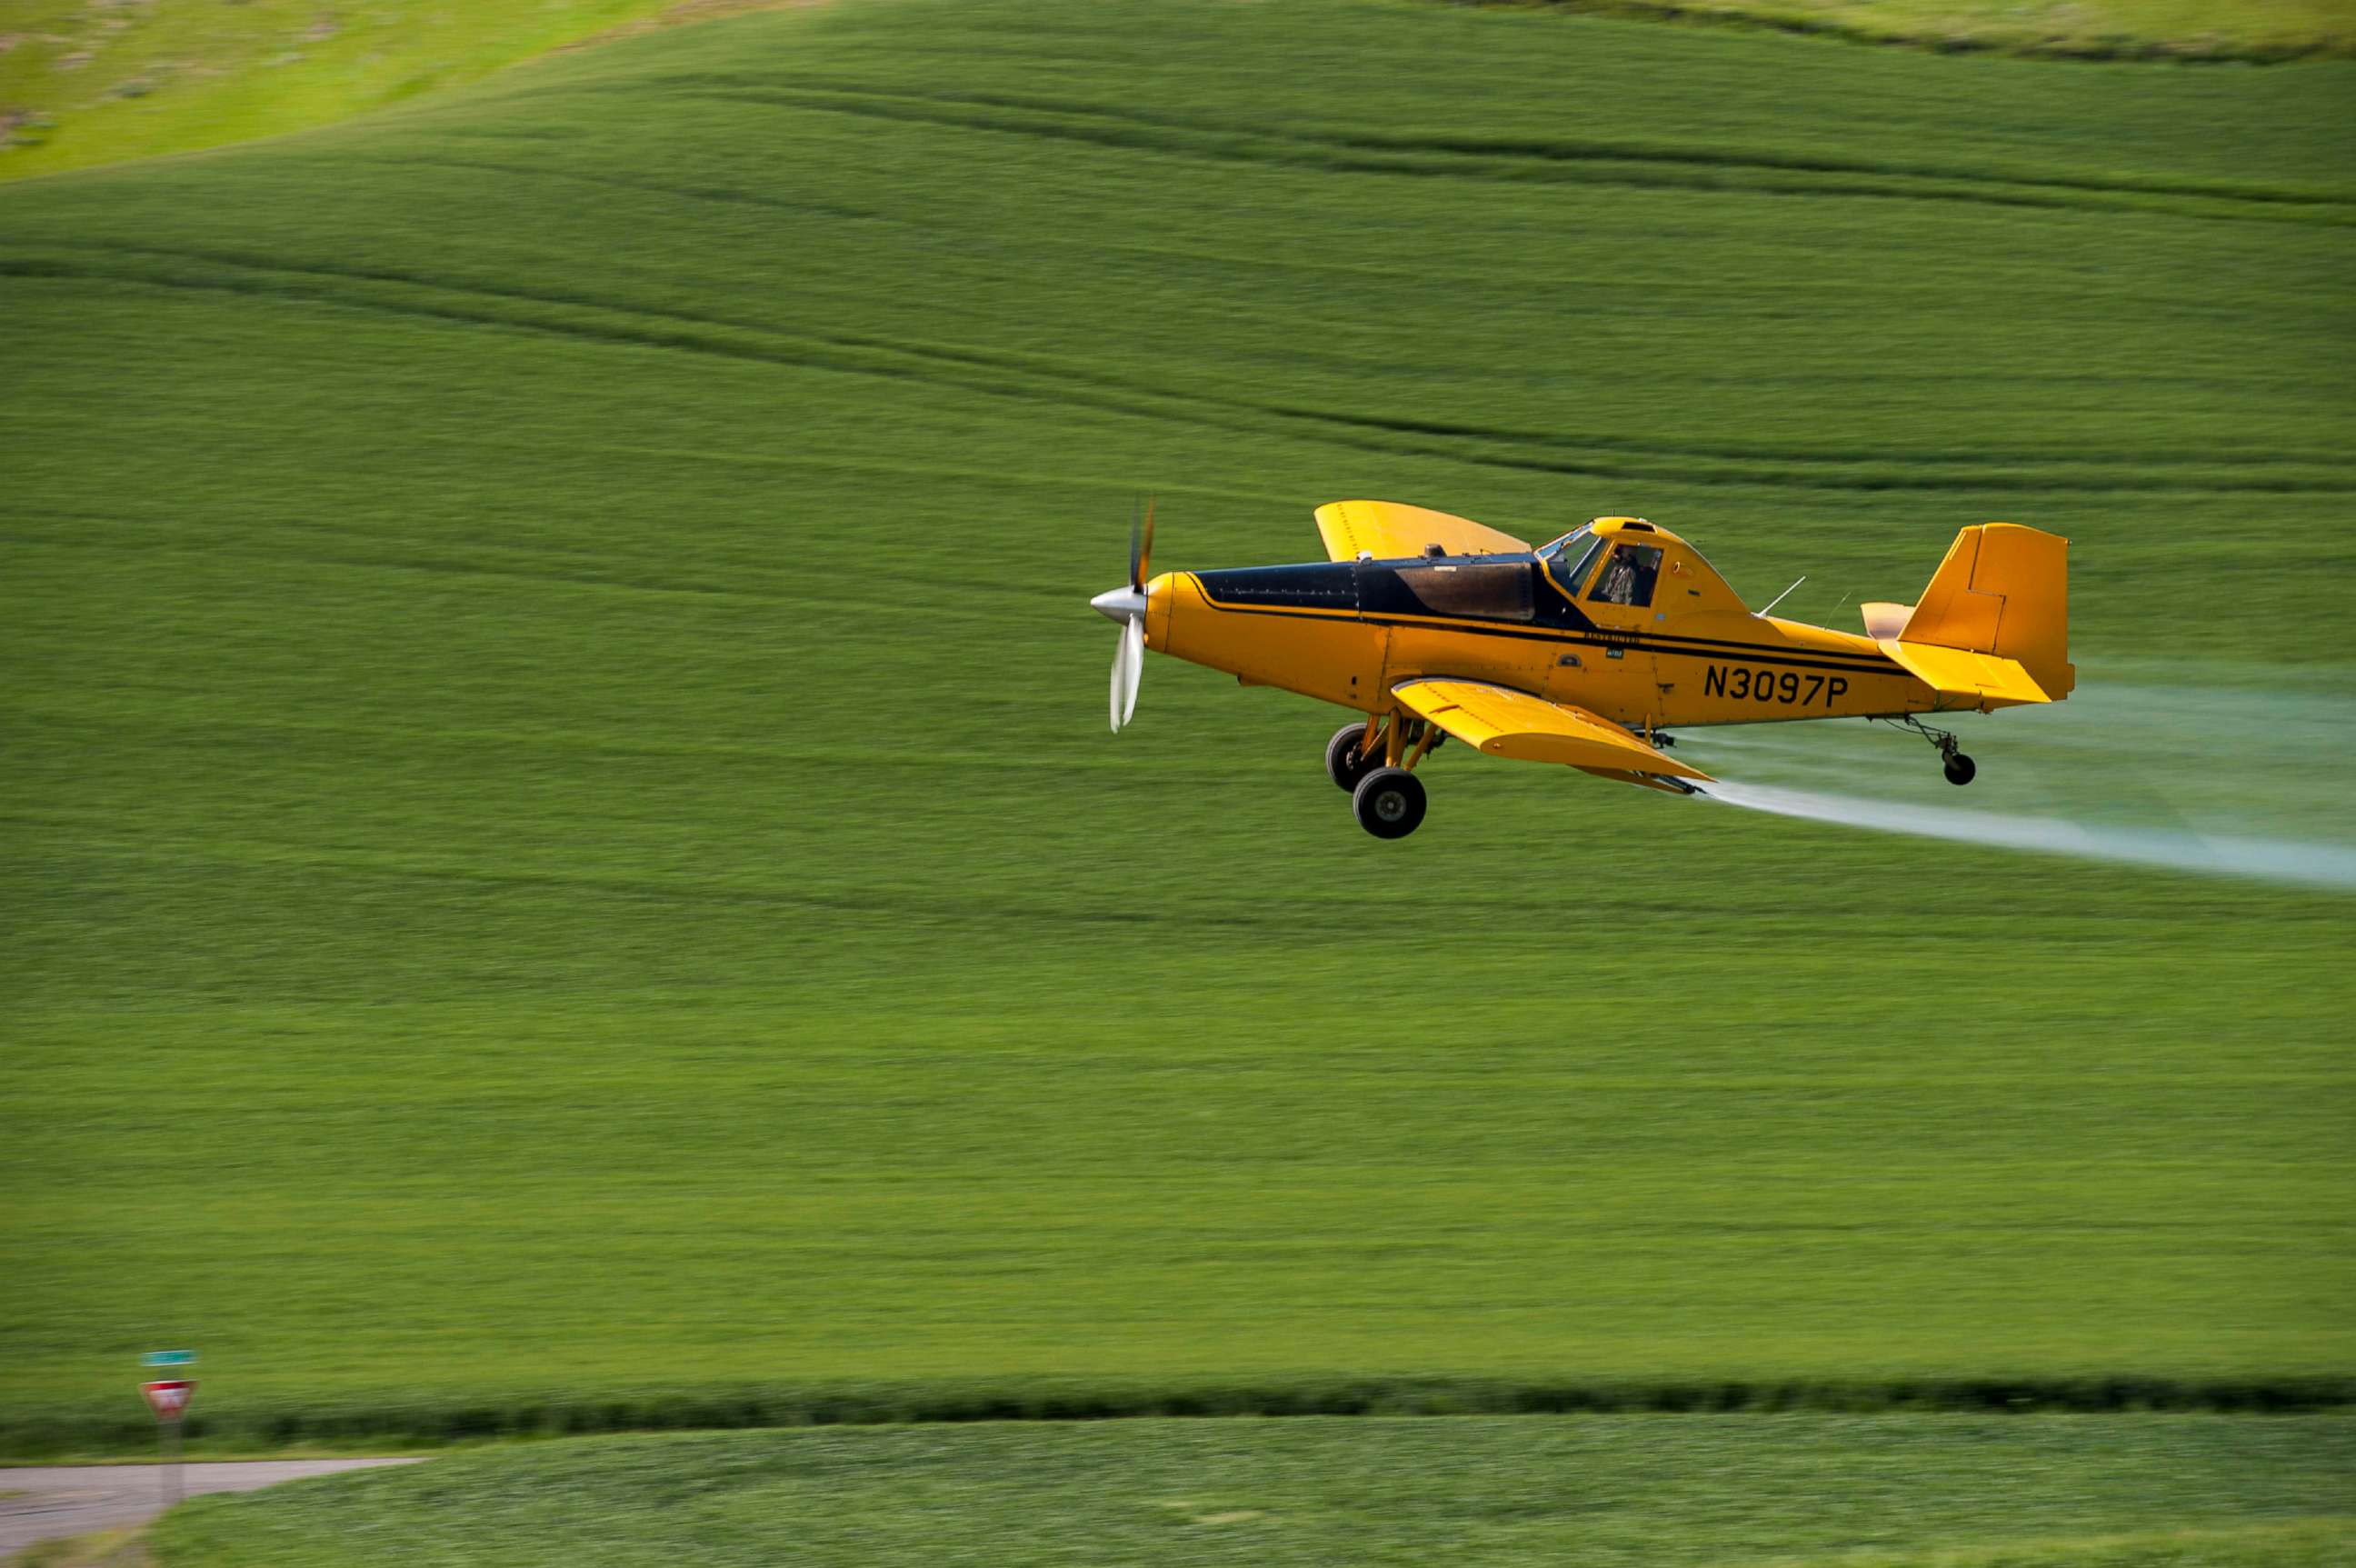 PHOTO: An undated photo shows a Crop duster plane flying over a field near Pullman, Wash.